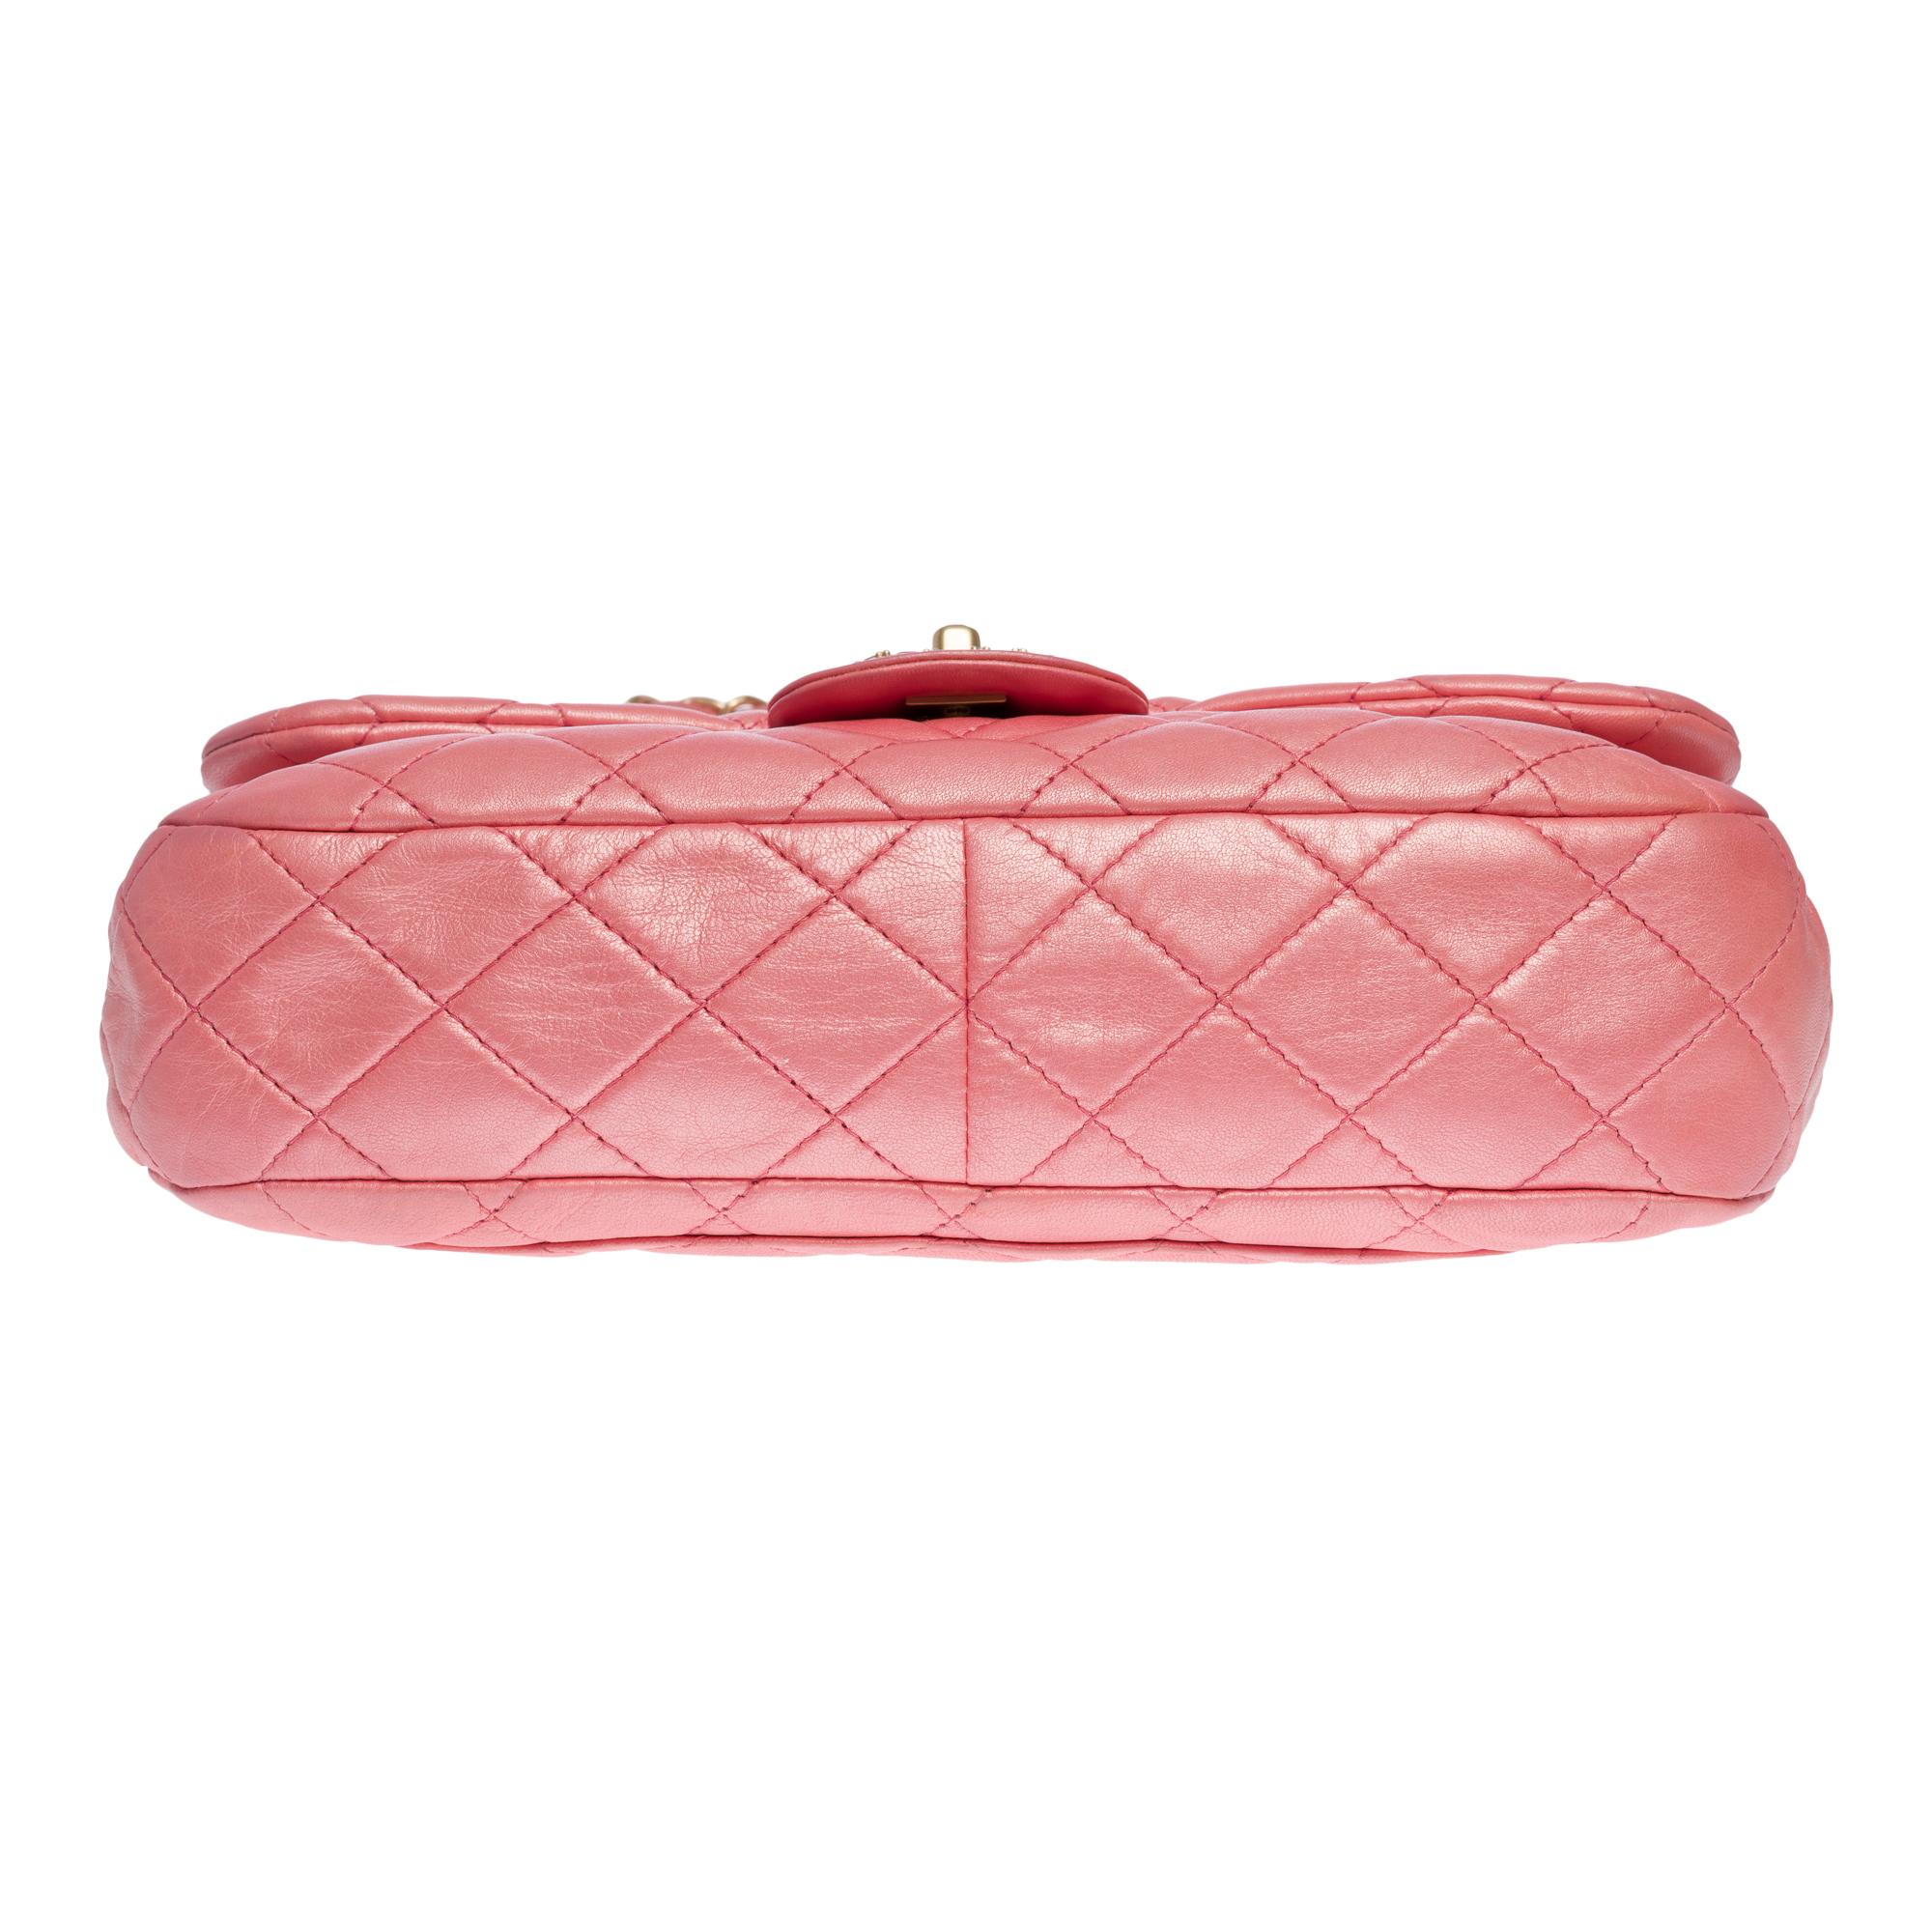 Chanel limited edition shoulder flap bag in Metallic Pink quilted leather, MGHW For Sale 4